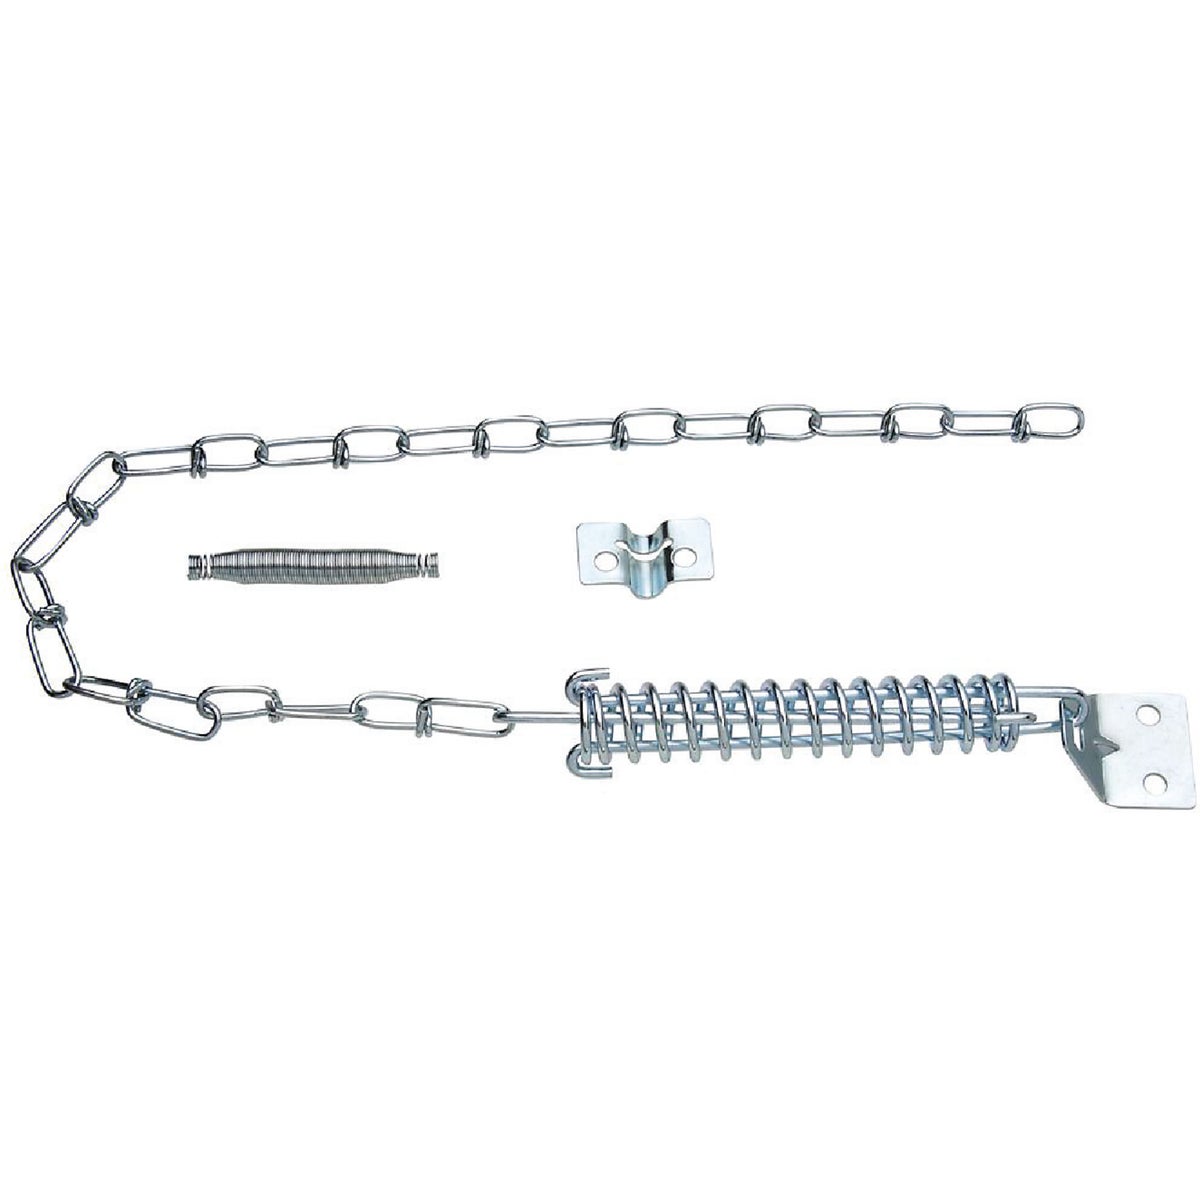 Item 211078, Steel brackets and chain; spring steel. Zinc-plated finish.